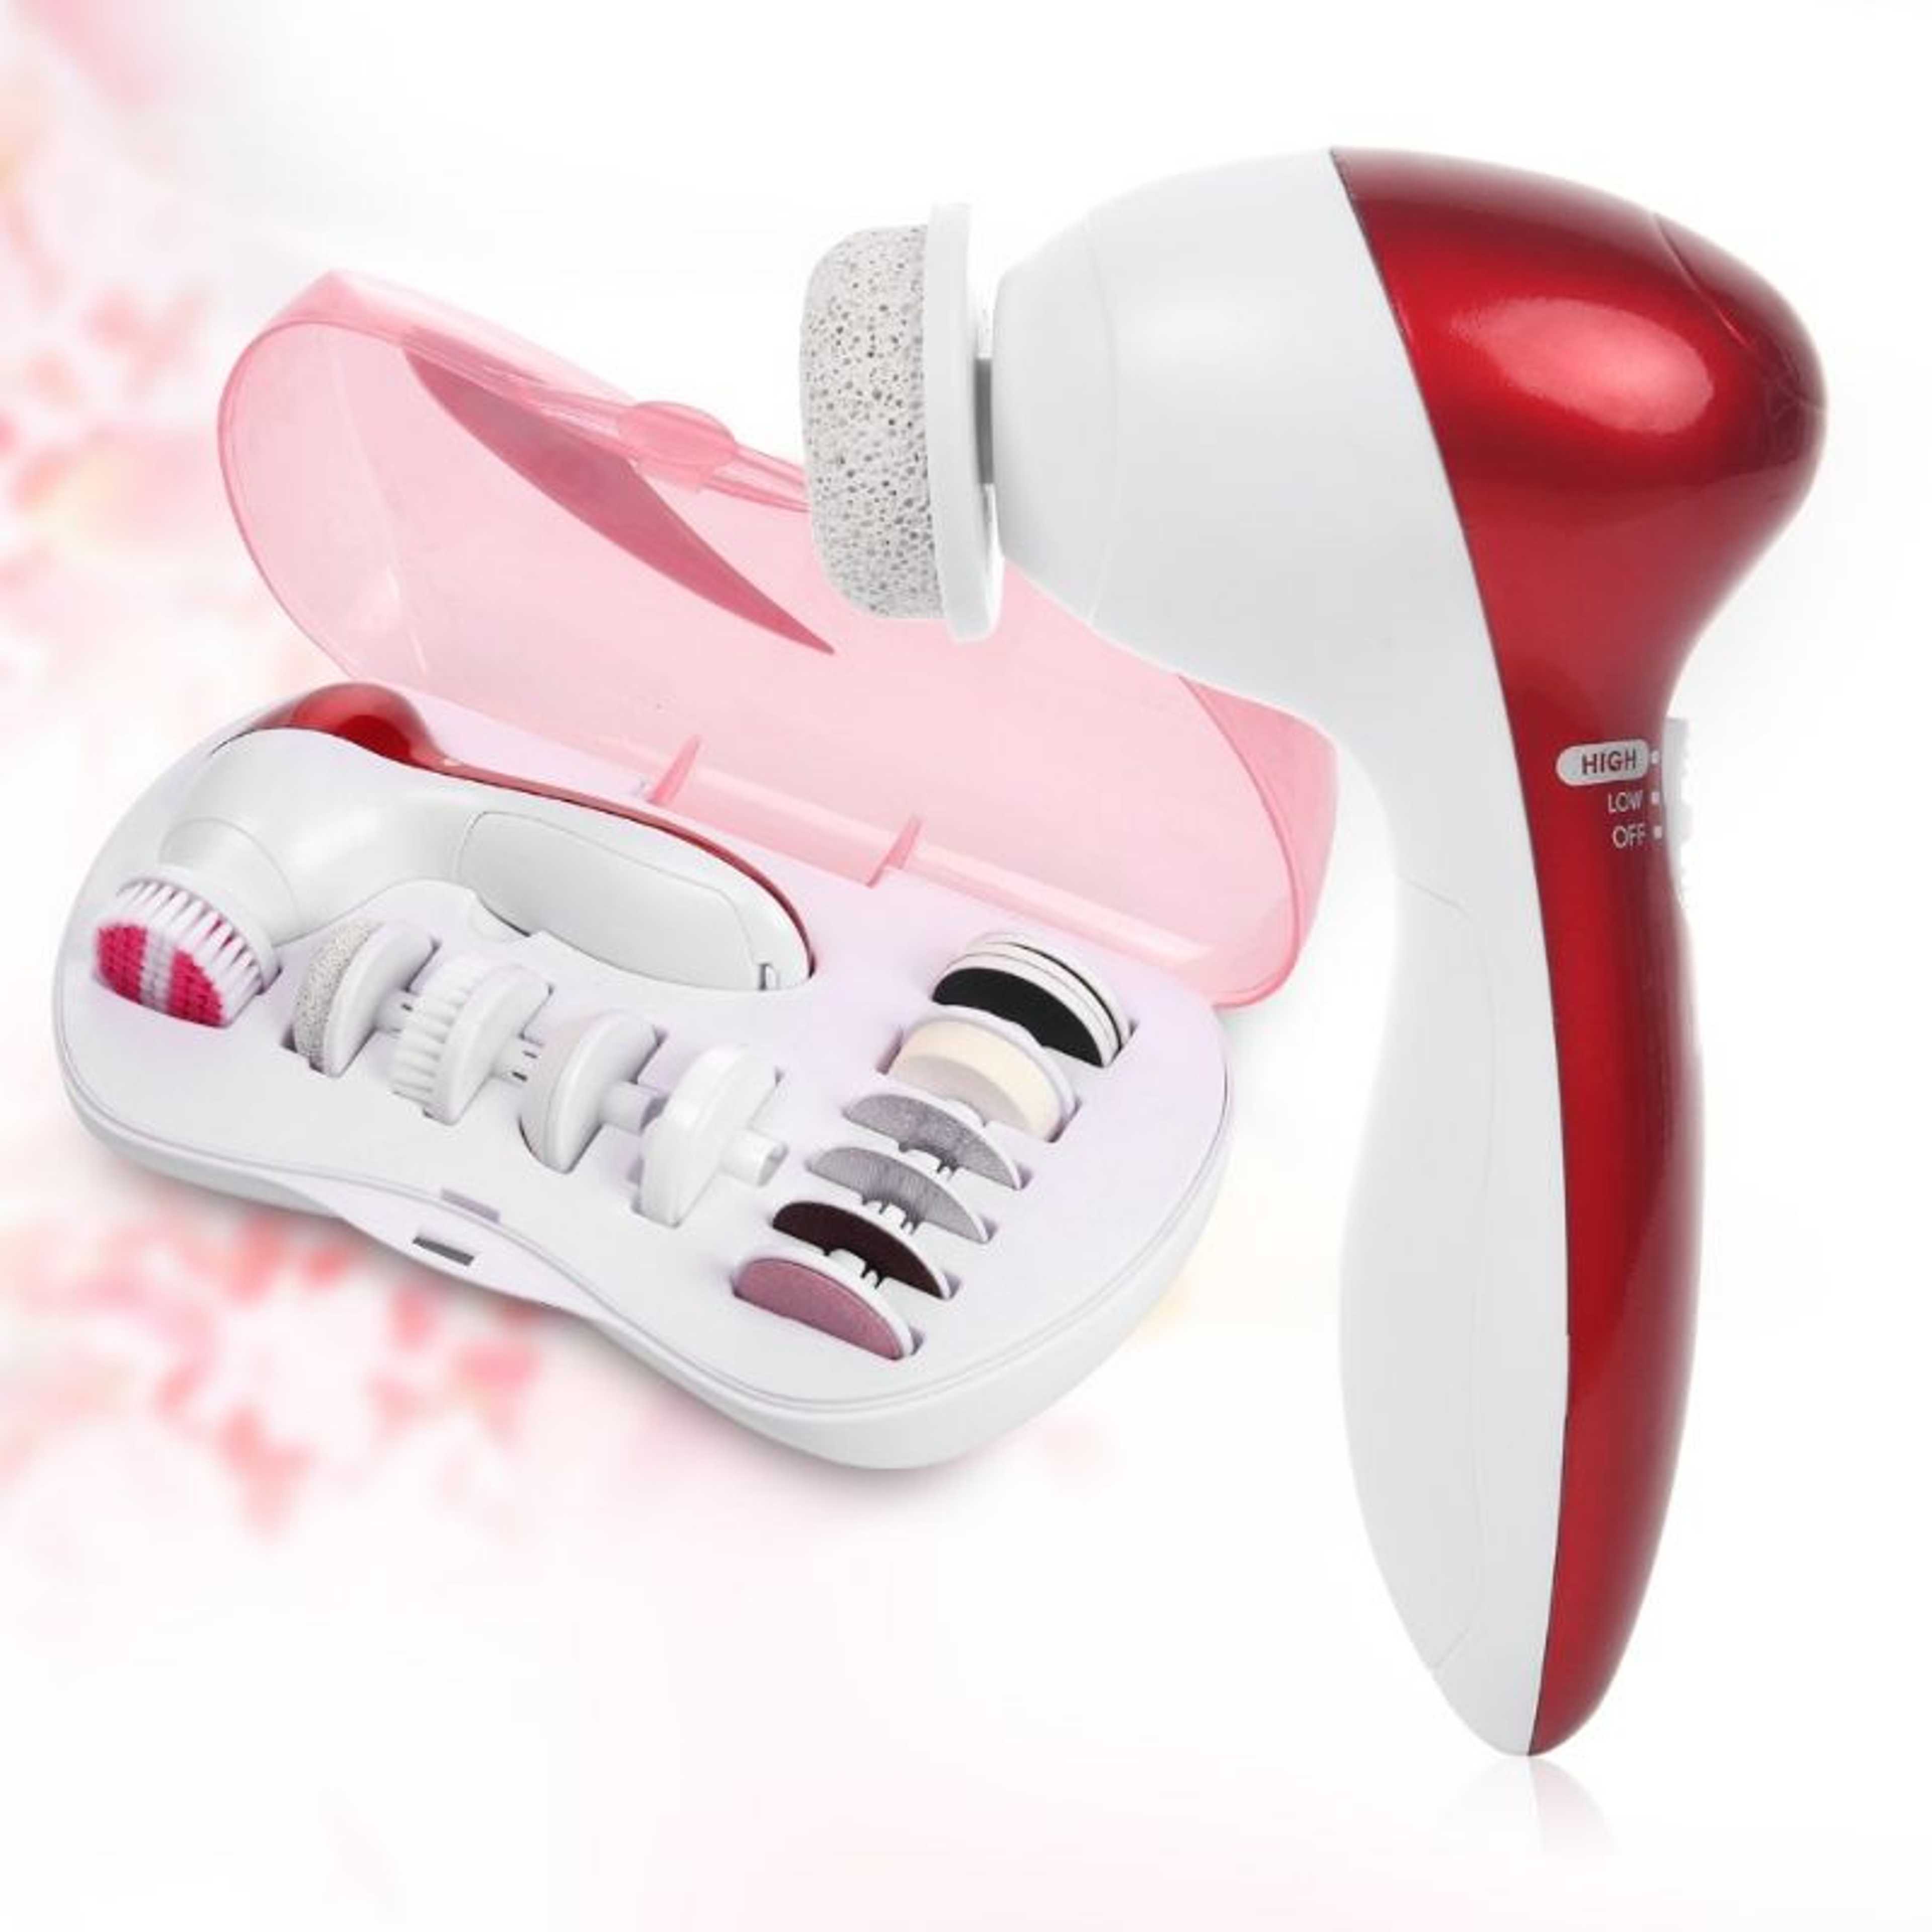 11 In 1 Facial Cleansing Brush Electric Face Foot Hands Cleaning Machine